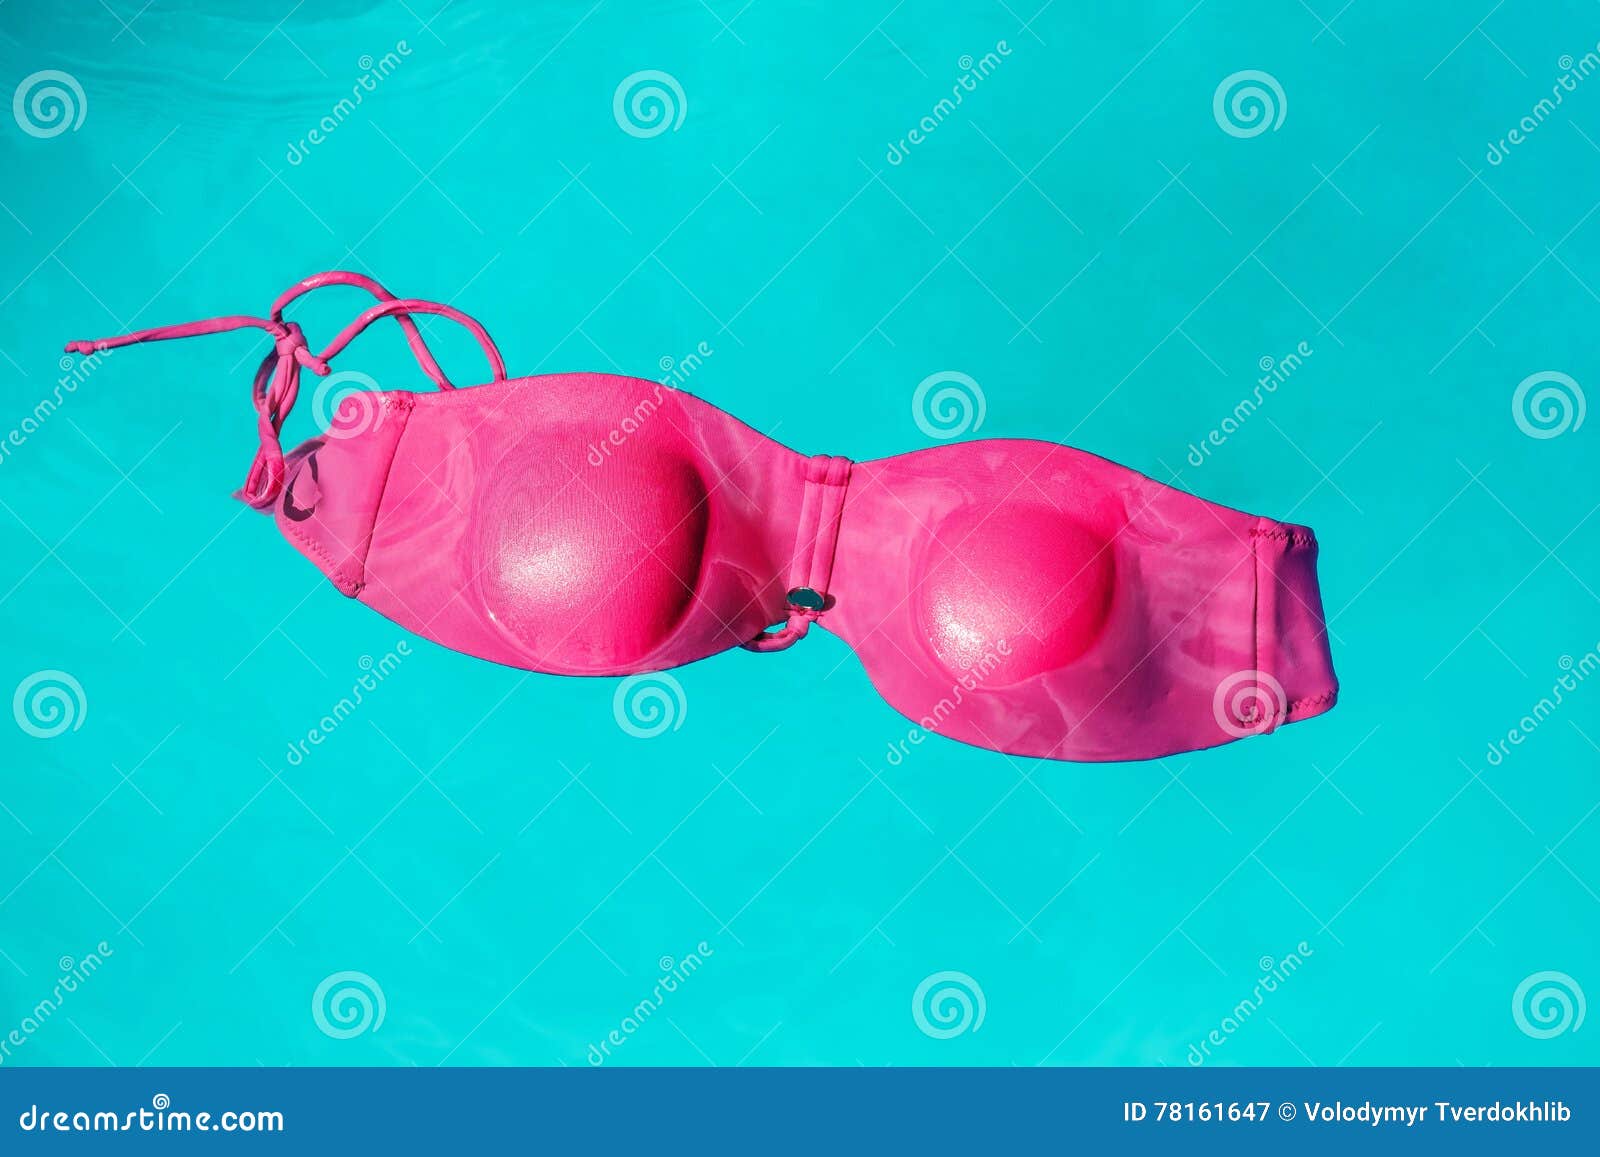 Pink Female Swimsuit Bra on Water Stock Image - Image of summer ...